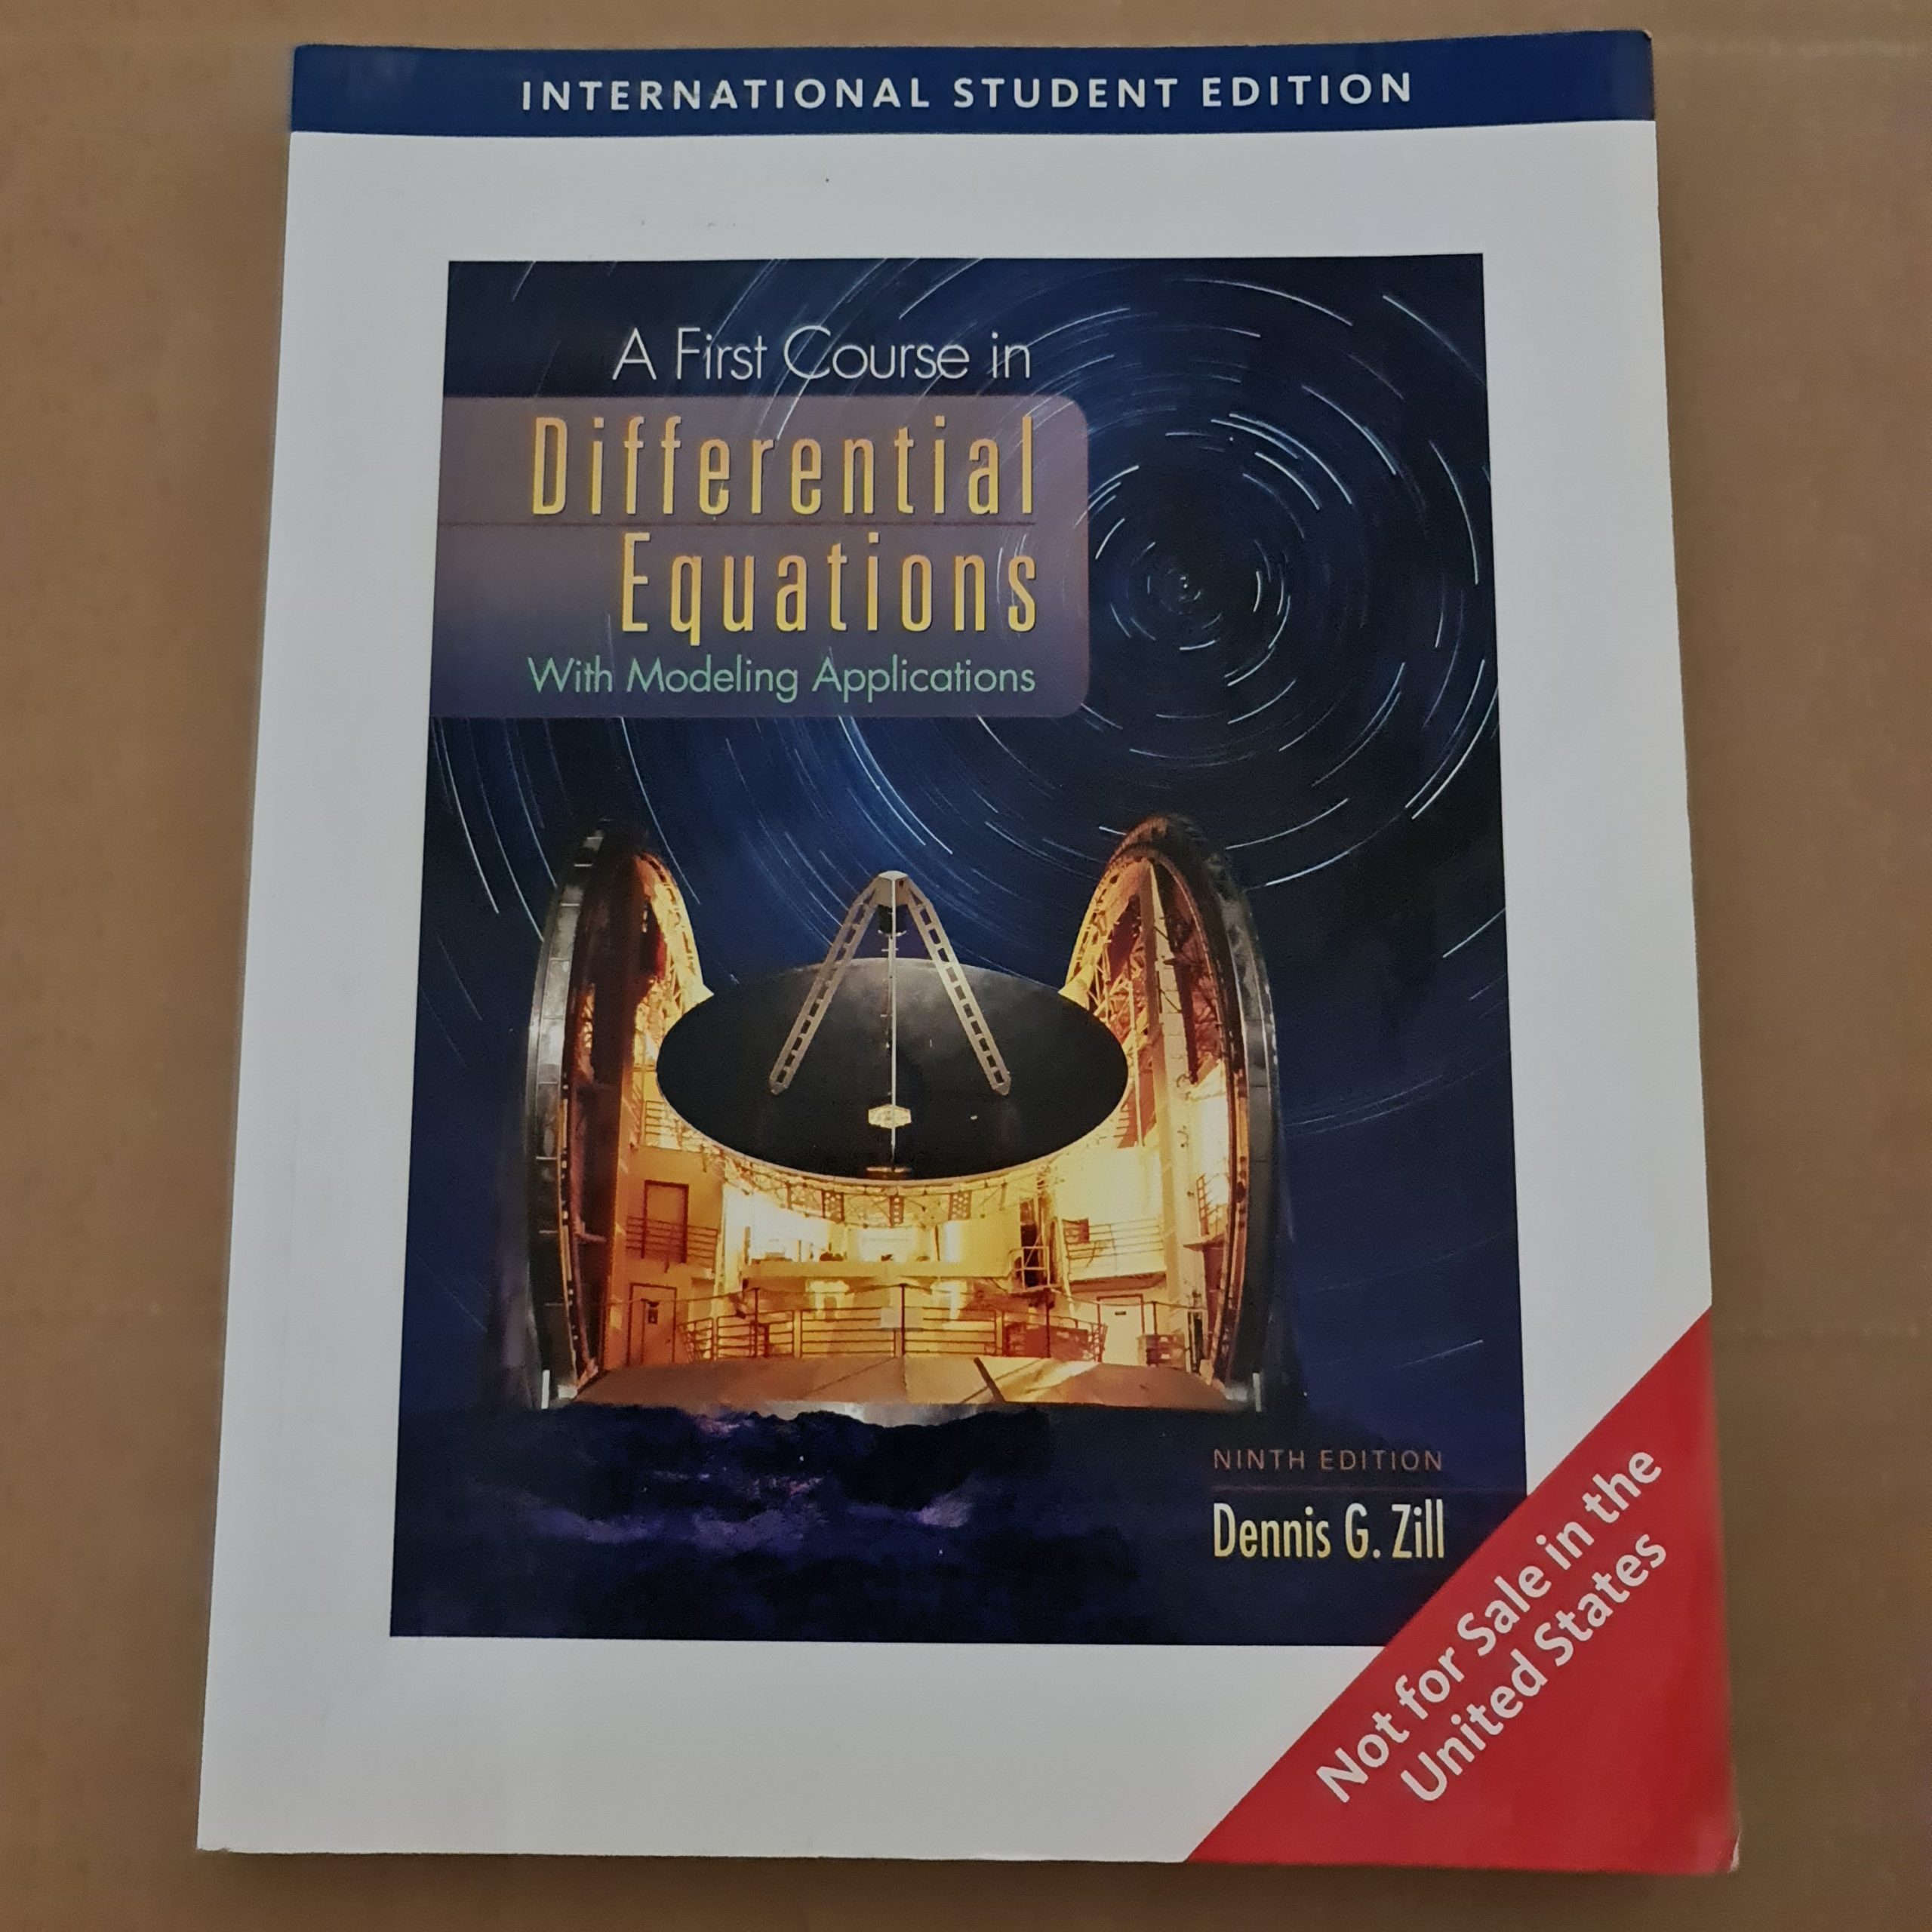 A First Course in Differential Equations with Modeling Applications by Dennis G. Zill (9th Edition - International Student Edition)